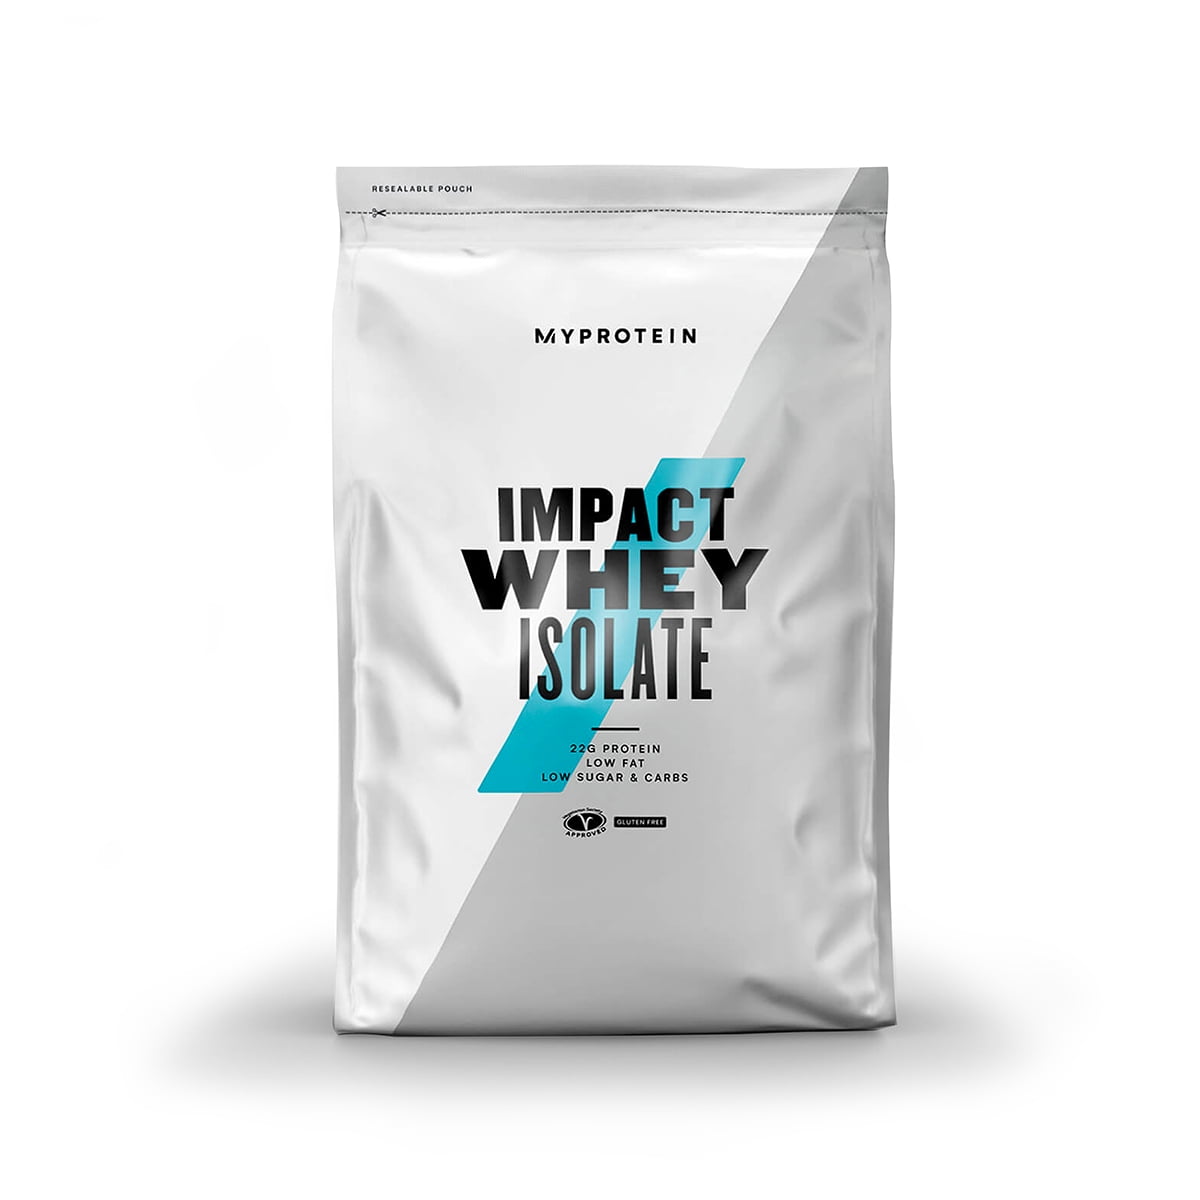 Myprotein Impact Whey Isolate - 5.5lbs Chocolate Smooth - Gluten